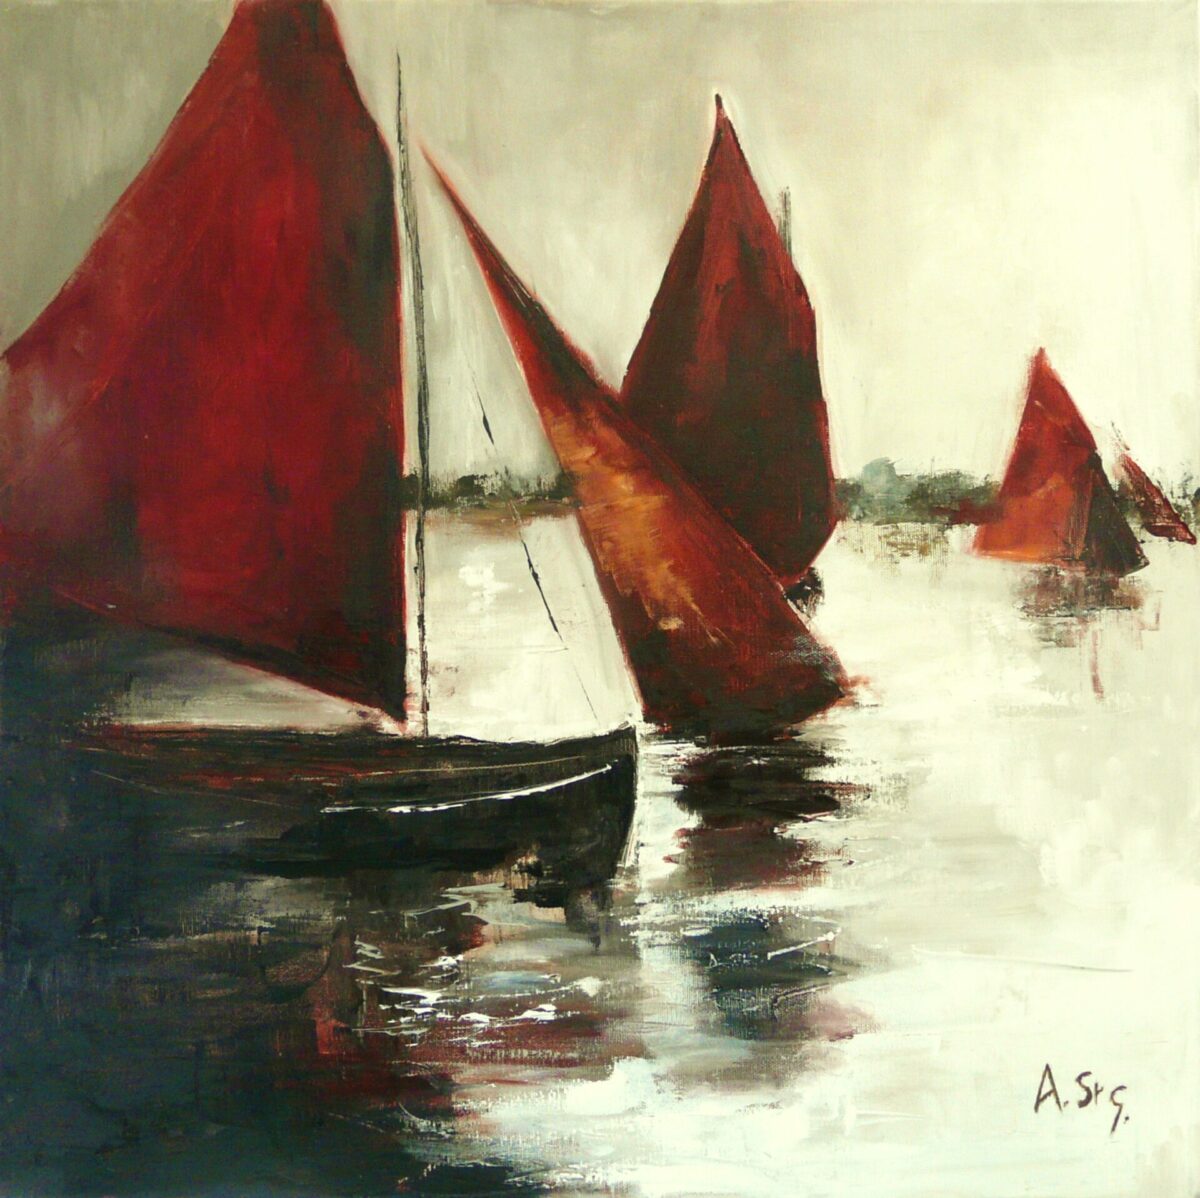 The End of the Regatta by Anna St George